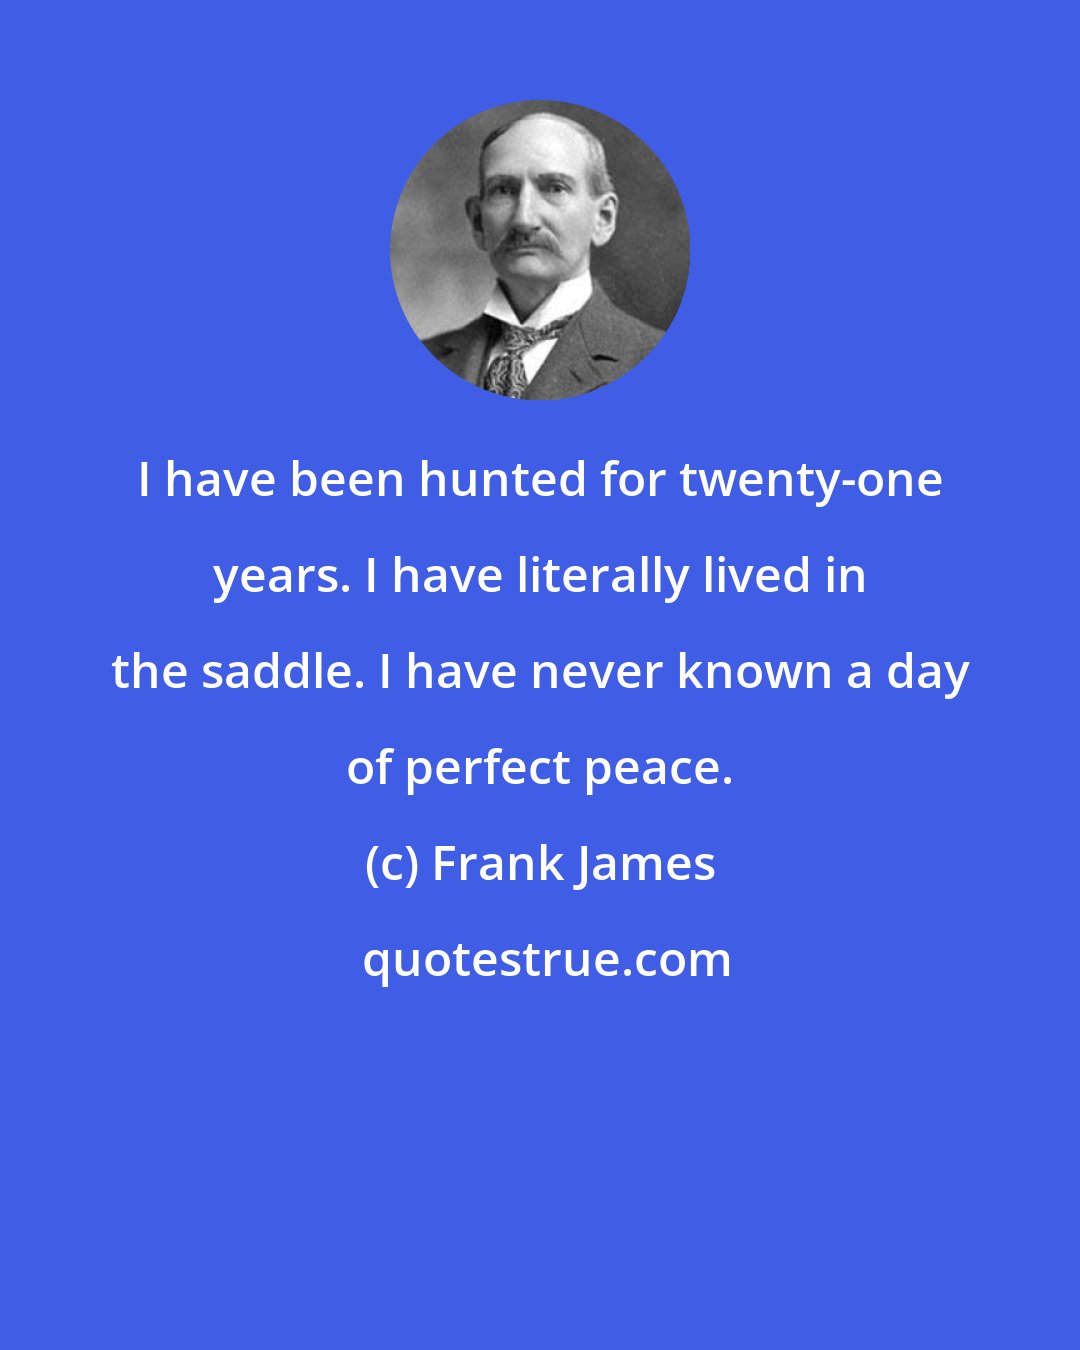 Frank James: I have been hunted for twenty-one years. I have literally lived in the saddle. I have never known a day of perfect peace.